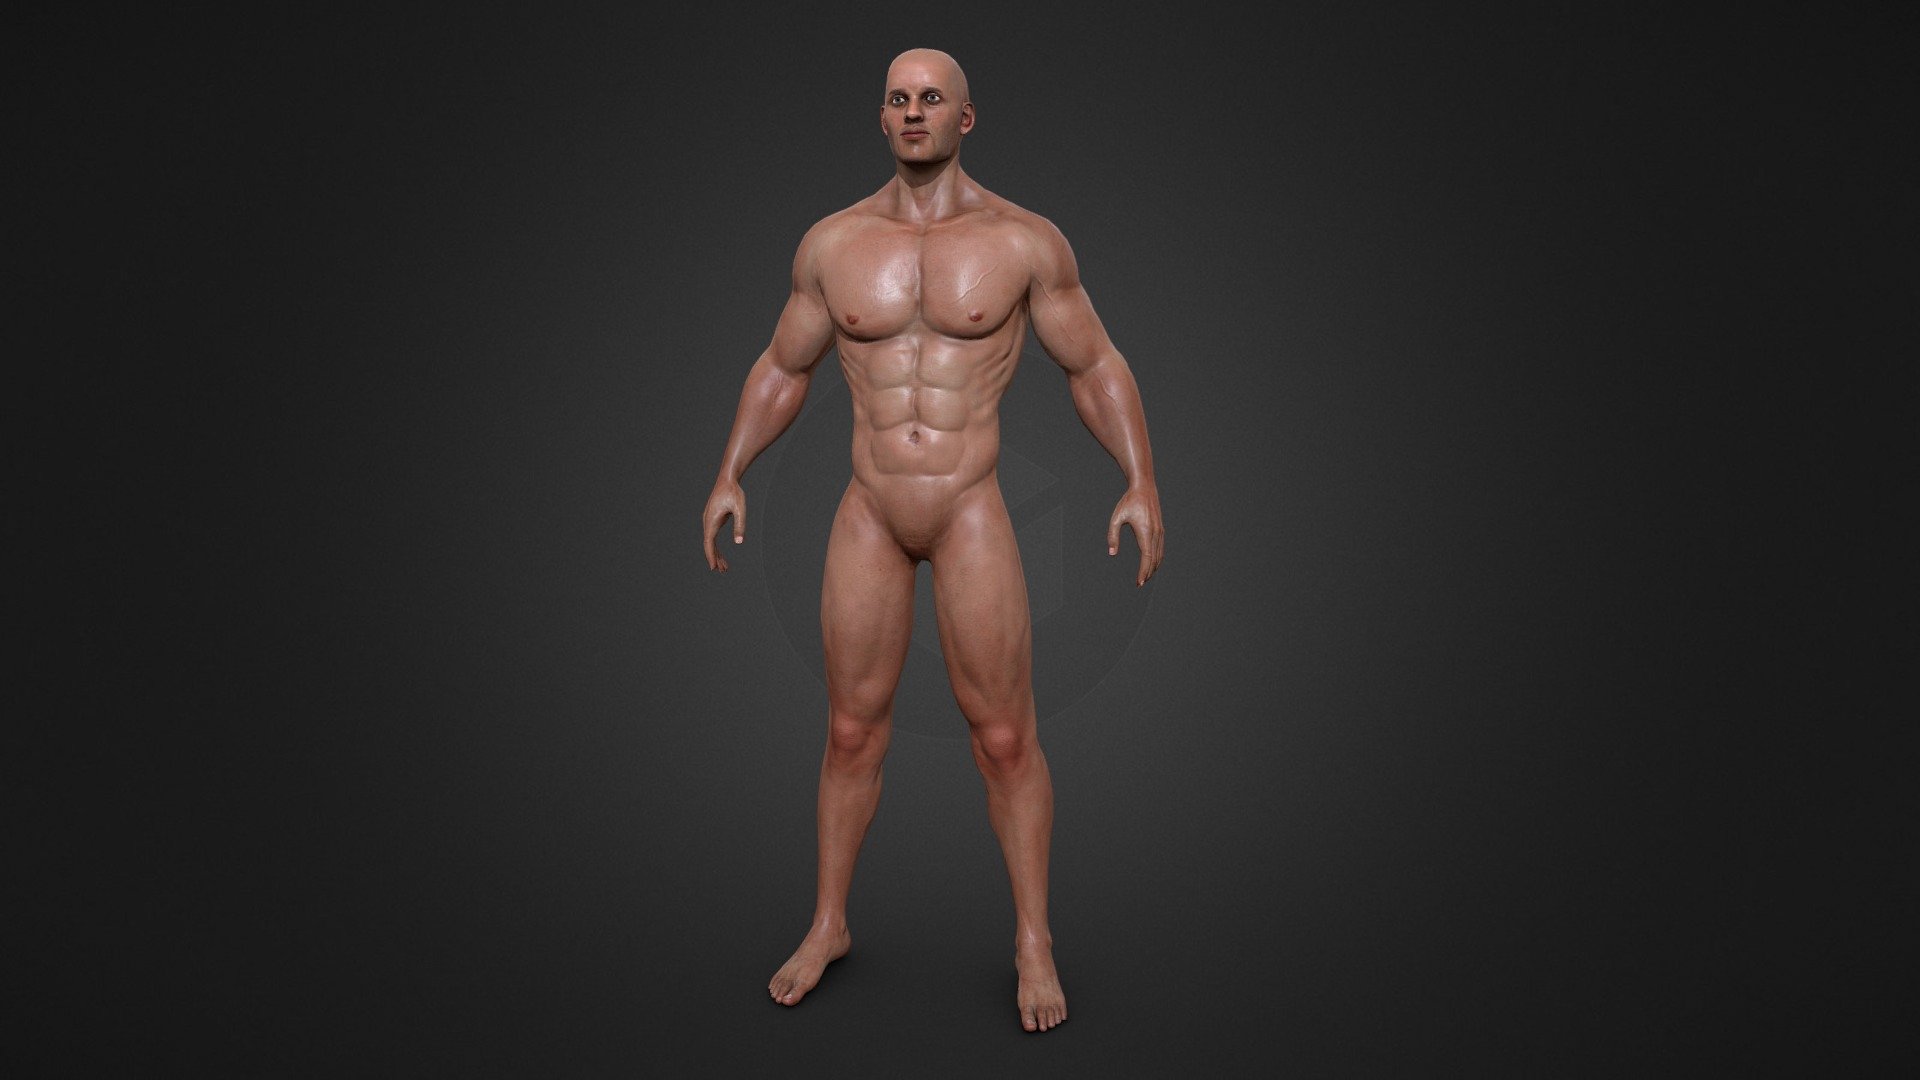 Use this for games and vfx or ragdoll shot, animation and game ready topology.
Game Redy Realistic male low poly body with 4k pbr textures, ( YOU WILL GET ZBRUSH FILE WITH 6 SUB-DIVISON LEVEL FOR MORE EDITS) 
Basecolor x4096
roughness x4096
normals x4096
displacement x4096
scatteringx 4096
ambientocclussion x4096
Realistic Eyes with 4k maps, with Sclera and iris texture, - Realistic Male Lowpoly body - Buy Royalty Free 3D model by OrnaLabs 3d model